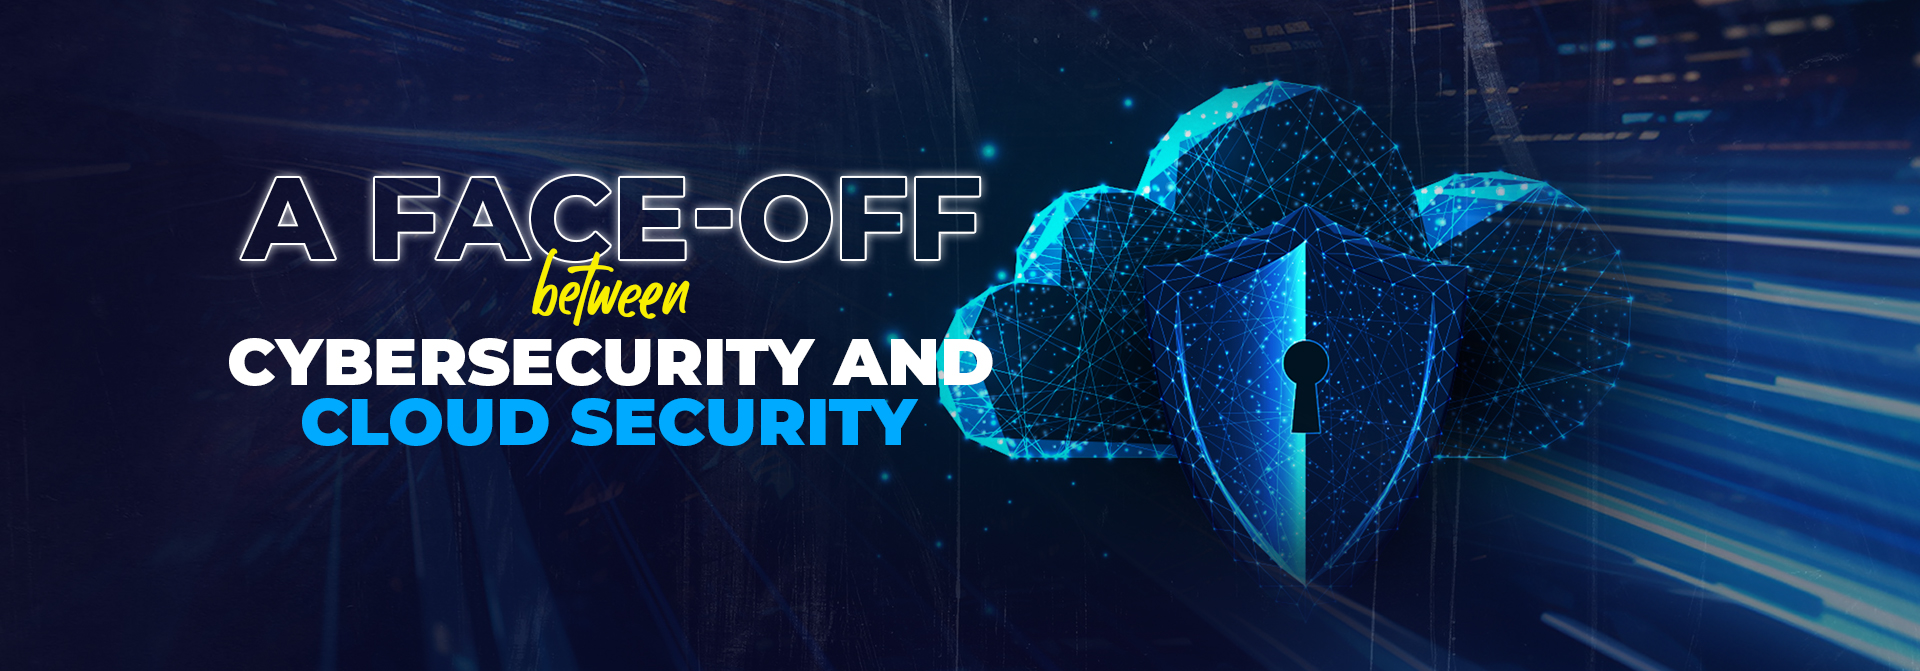 PAC-Blog_-Face-off-Between-Cybersecurity-and-Cloud-Security_main-banner